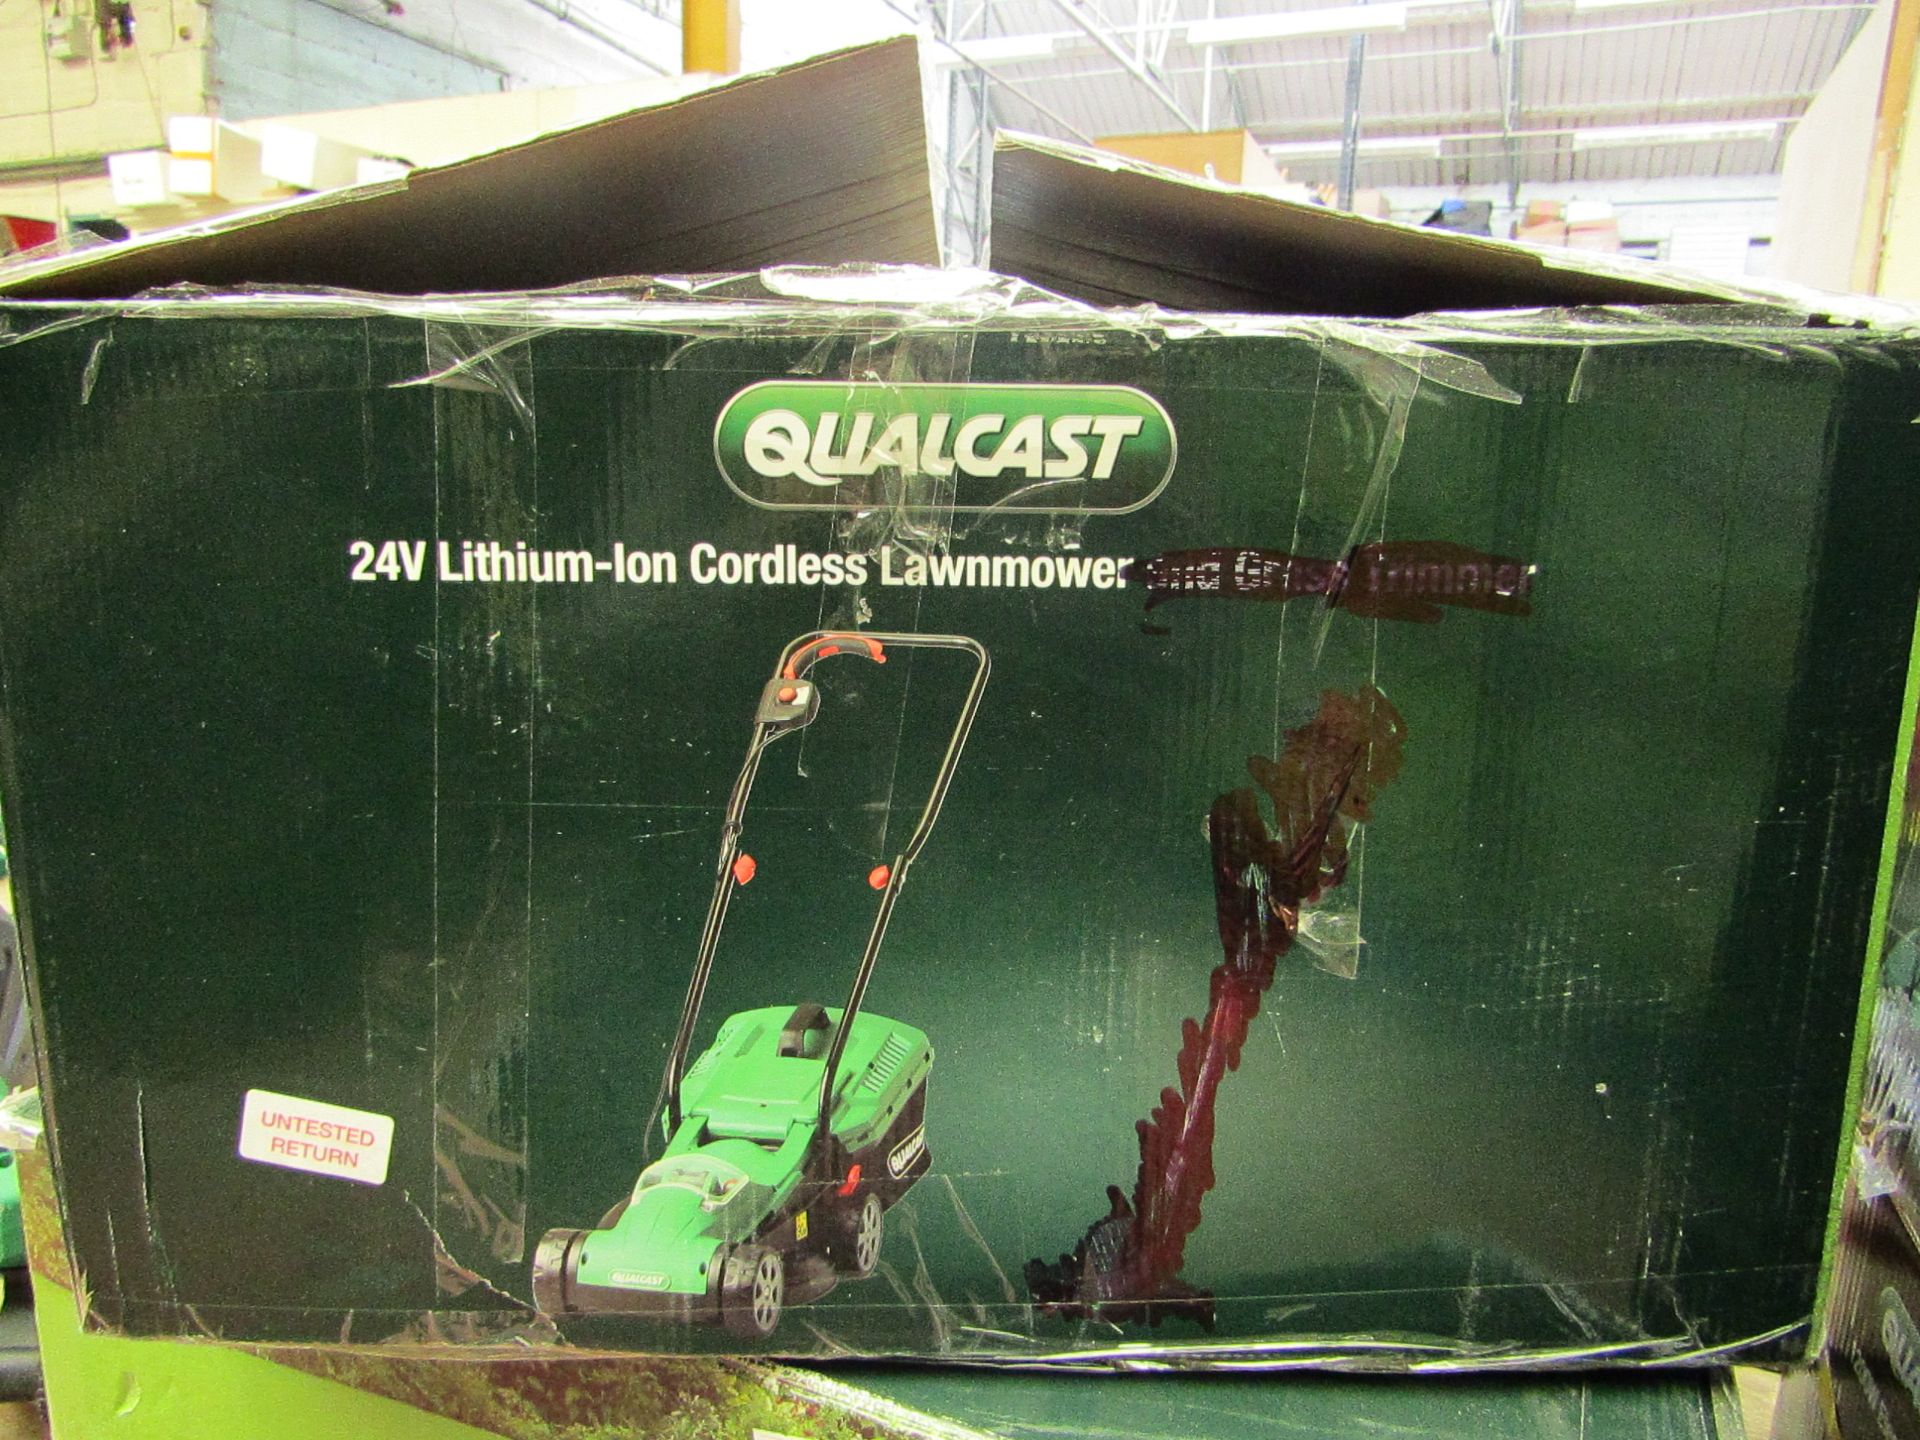 Qualcast 24v cordless lawnmower, this item is tested working and boxed